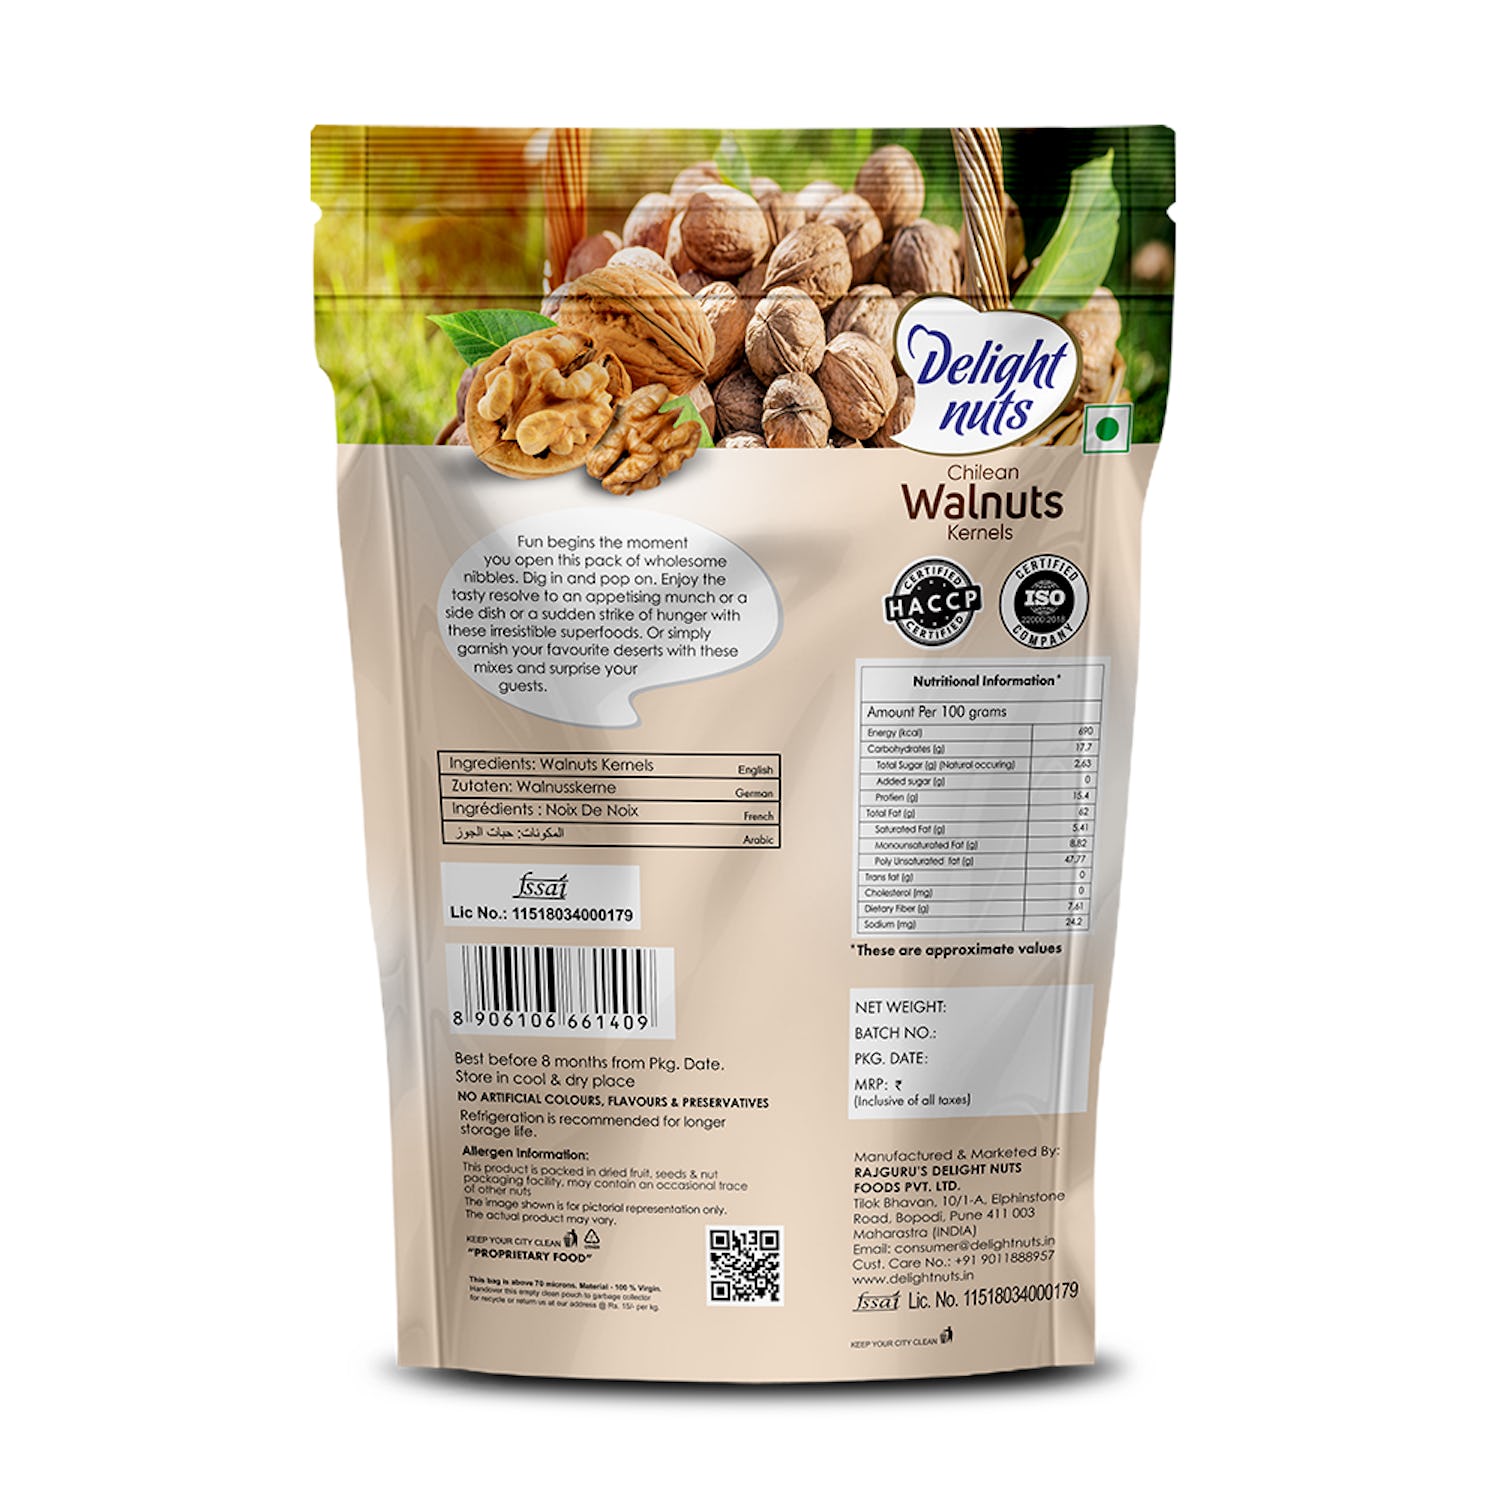 Delight Nuts Chilean Walnuts Kernels Pack, 200g